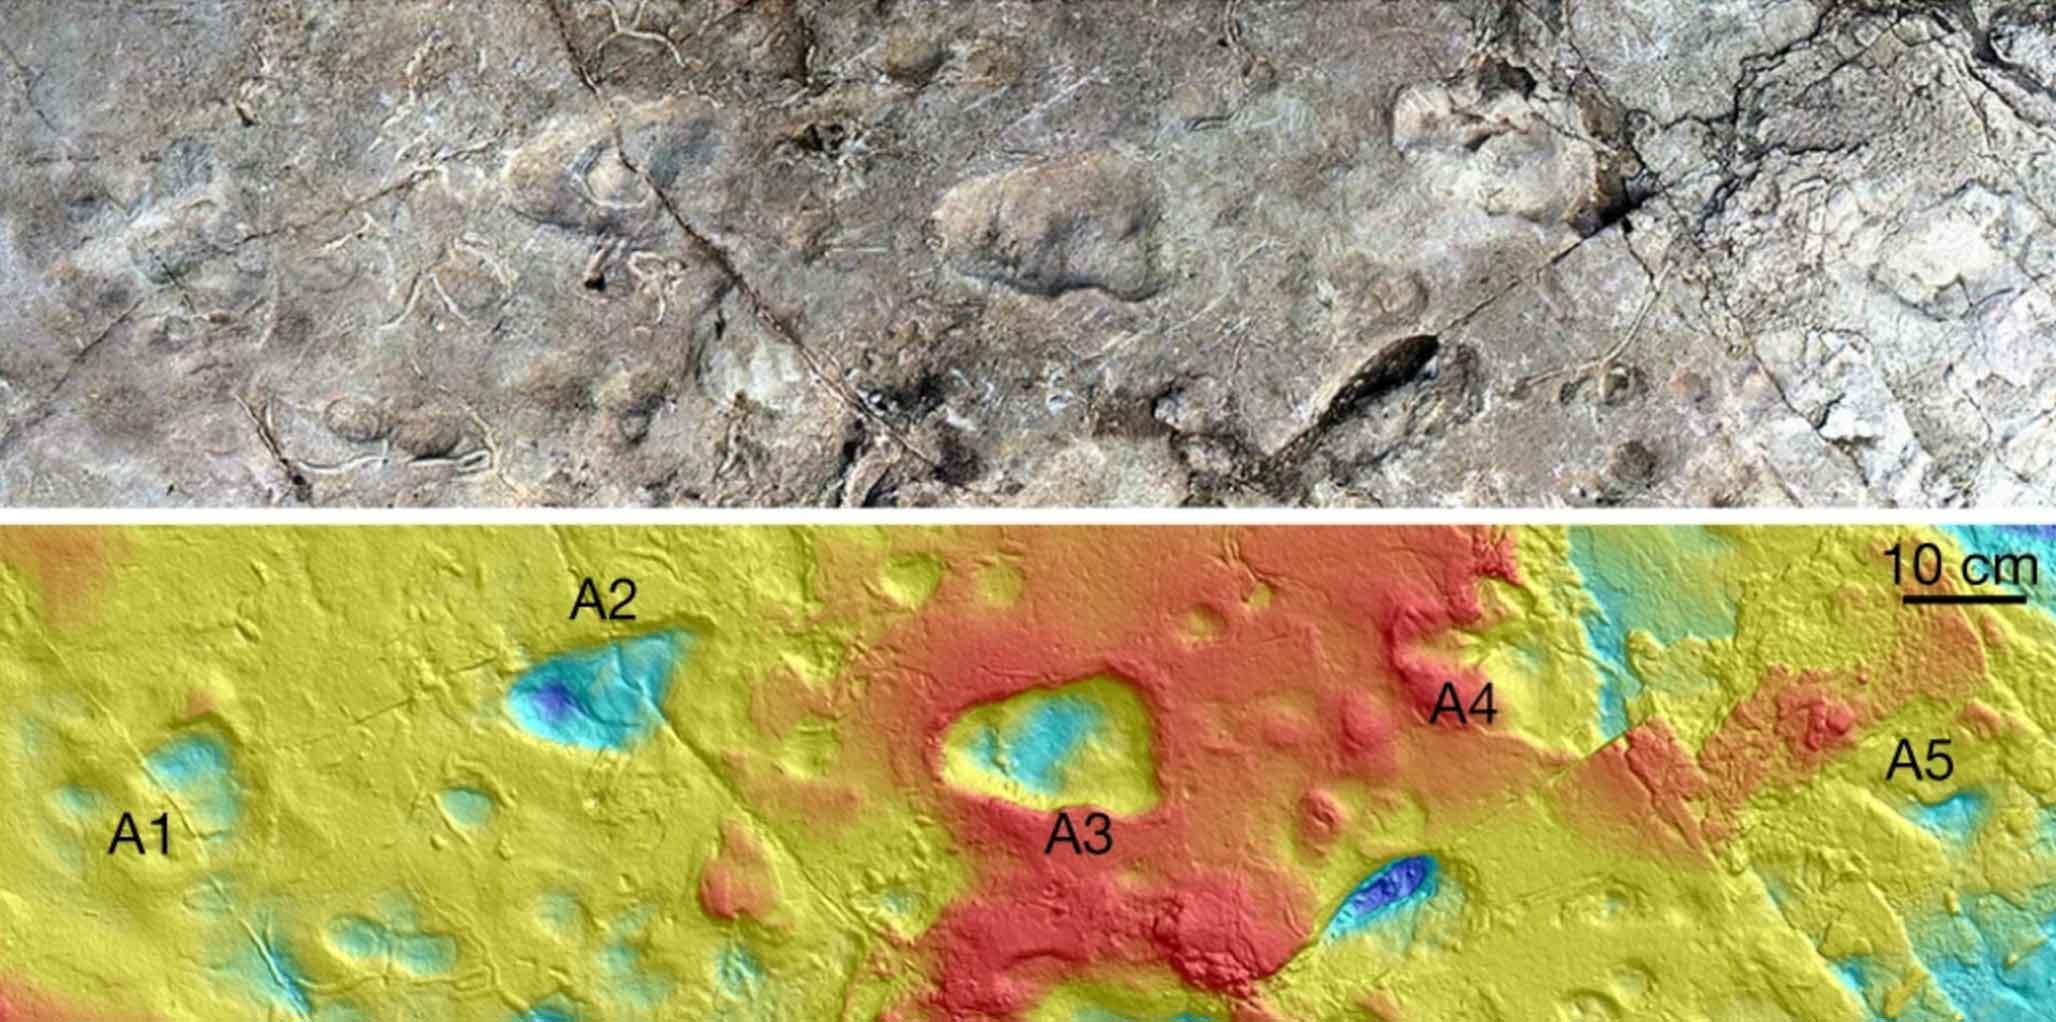 Laetoli footprint trackway A, showing five prints, with photo at top and 3D depth model at bottom.